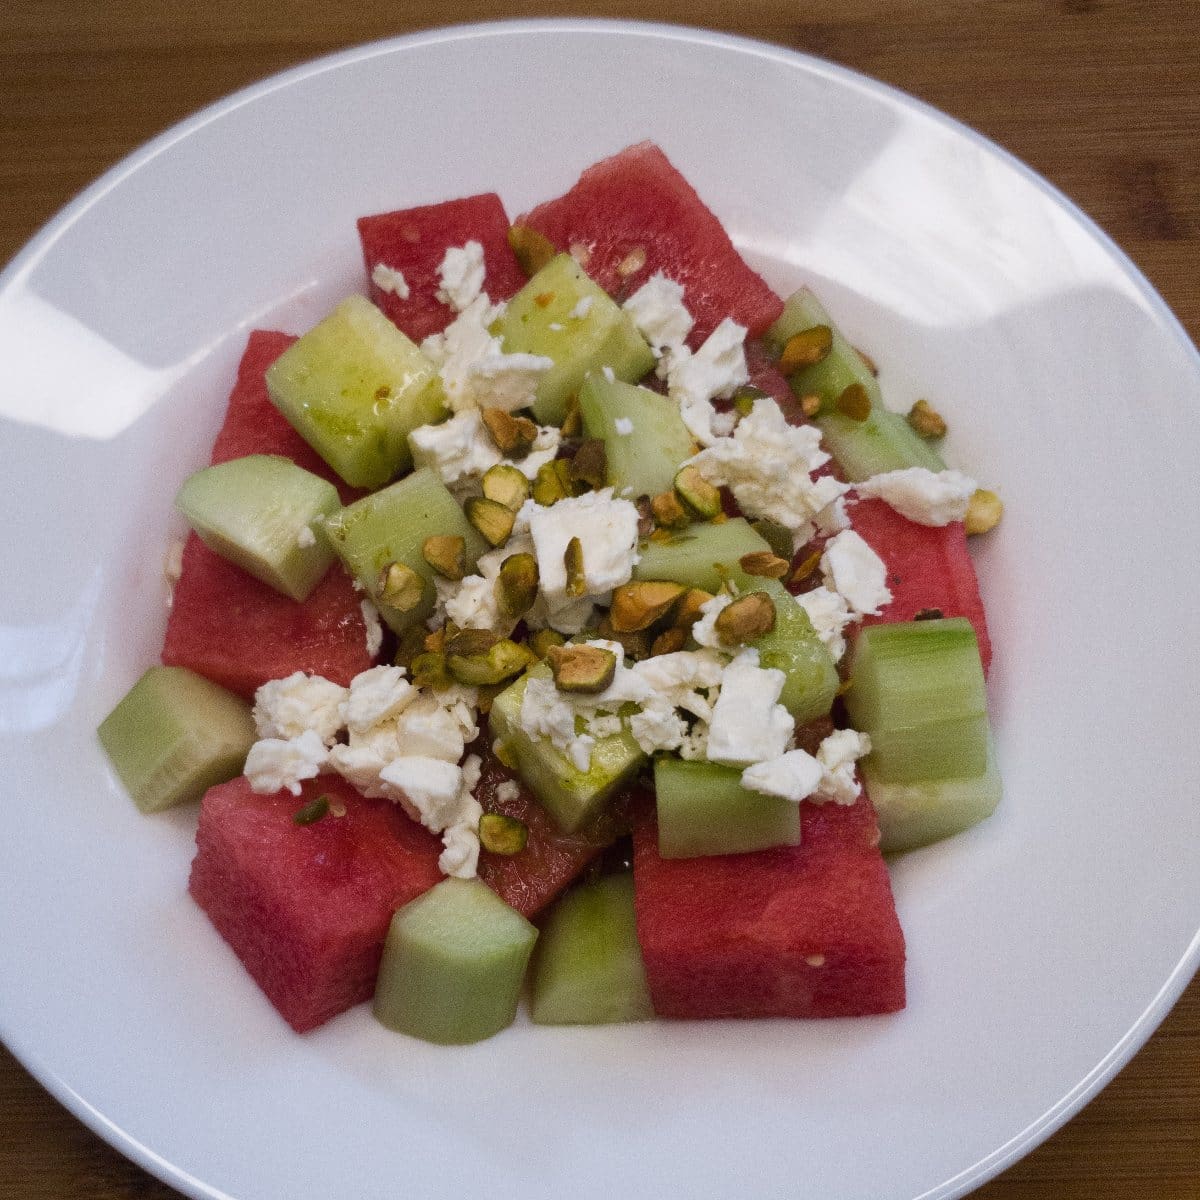 cucumber and watermelon salad recipe with feta cheese and pistachios from cleveland cooking